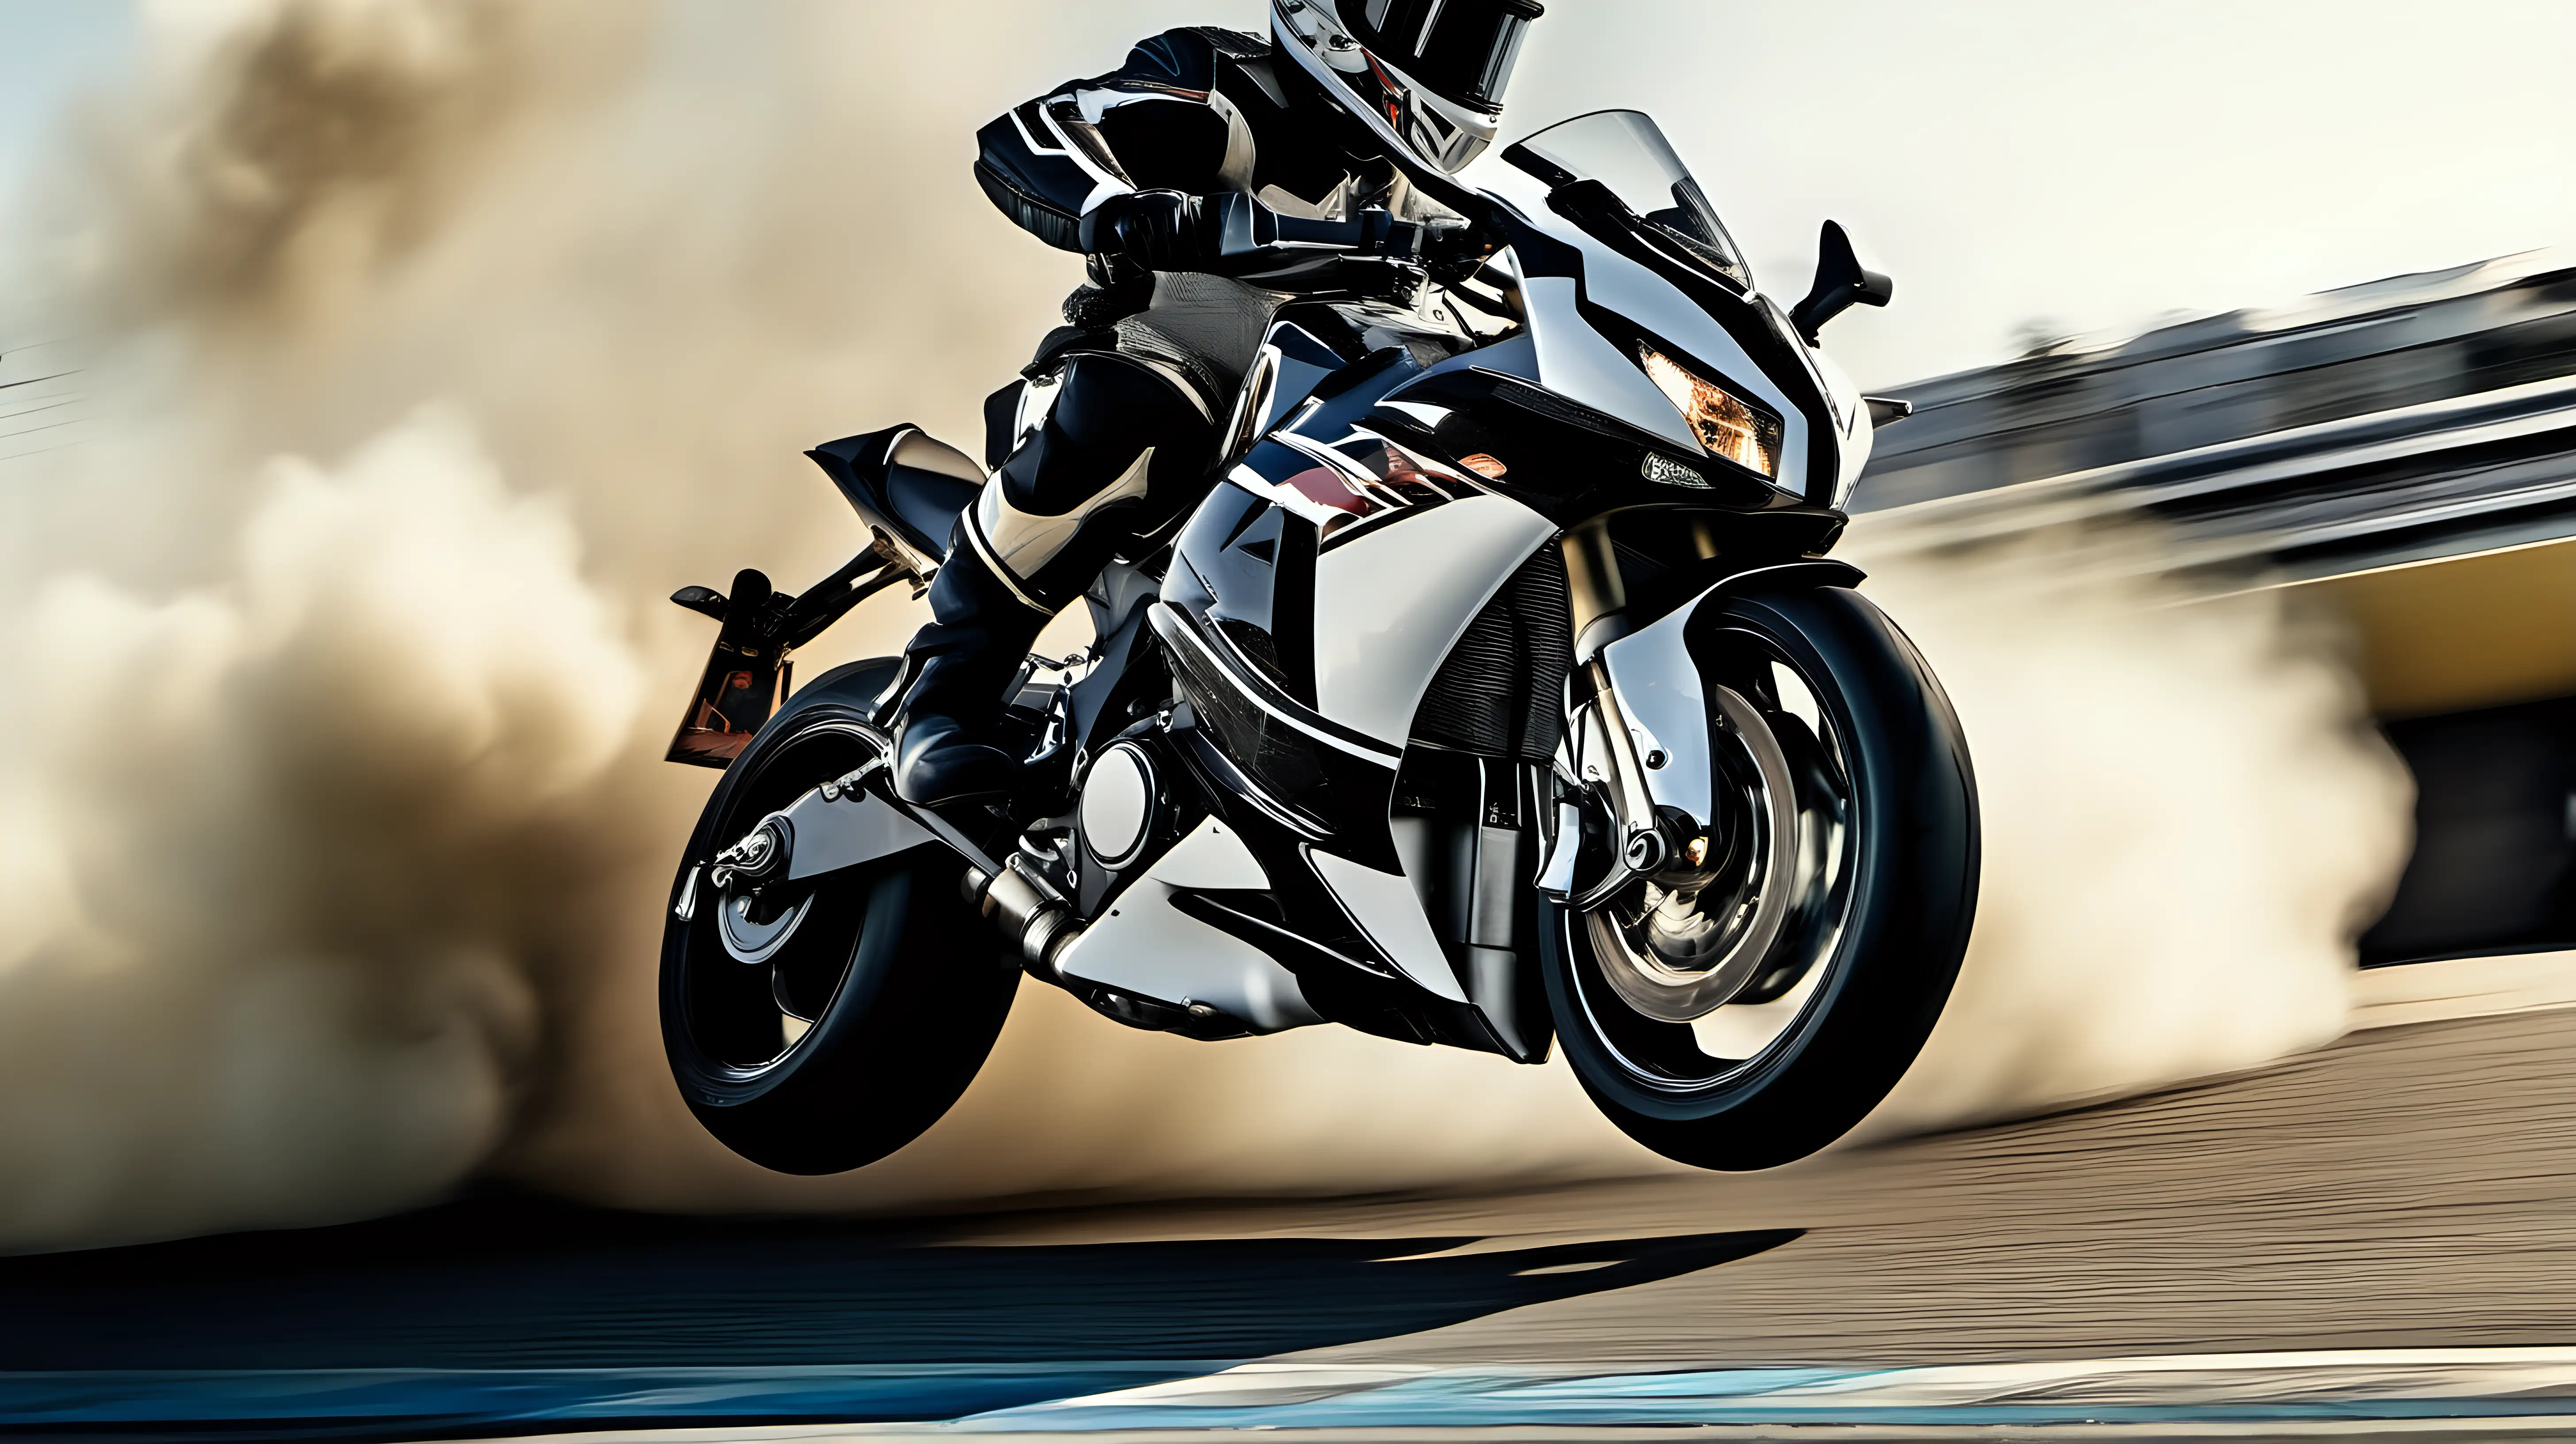 A breathtaking close-up of a power bike's front wheel lifting off the ground during a wheelie, with the rider's focused gaze visible through the visor of their helmet, capturing the raw power and excitement of the moment.